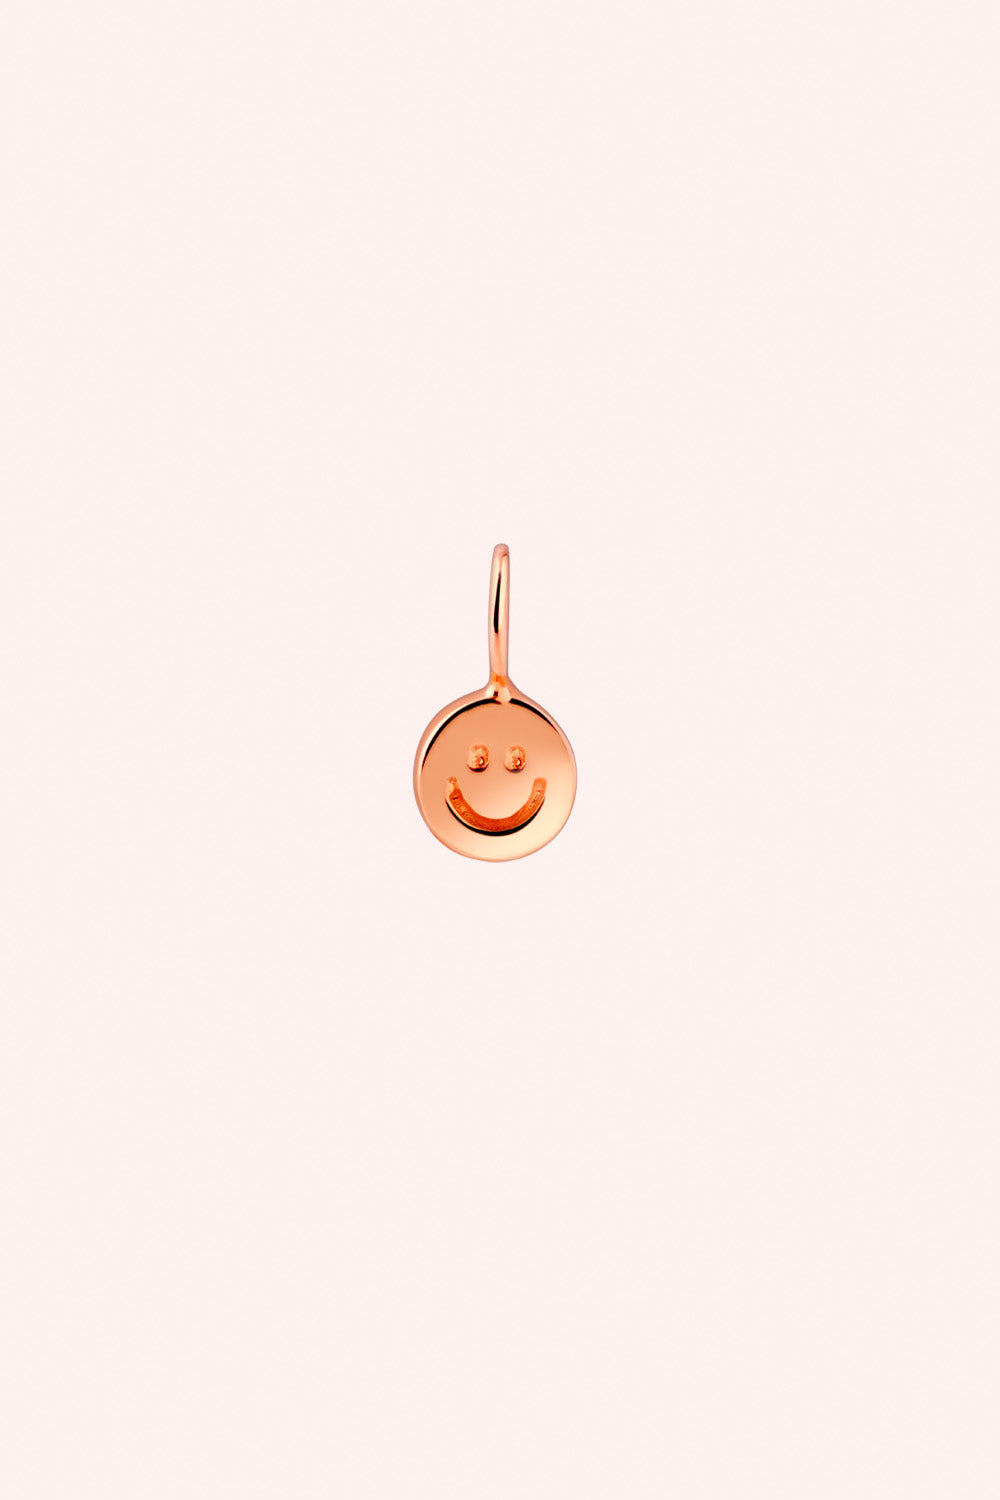 The Fine Rose Gold Smiley Charm Green Peridot